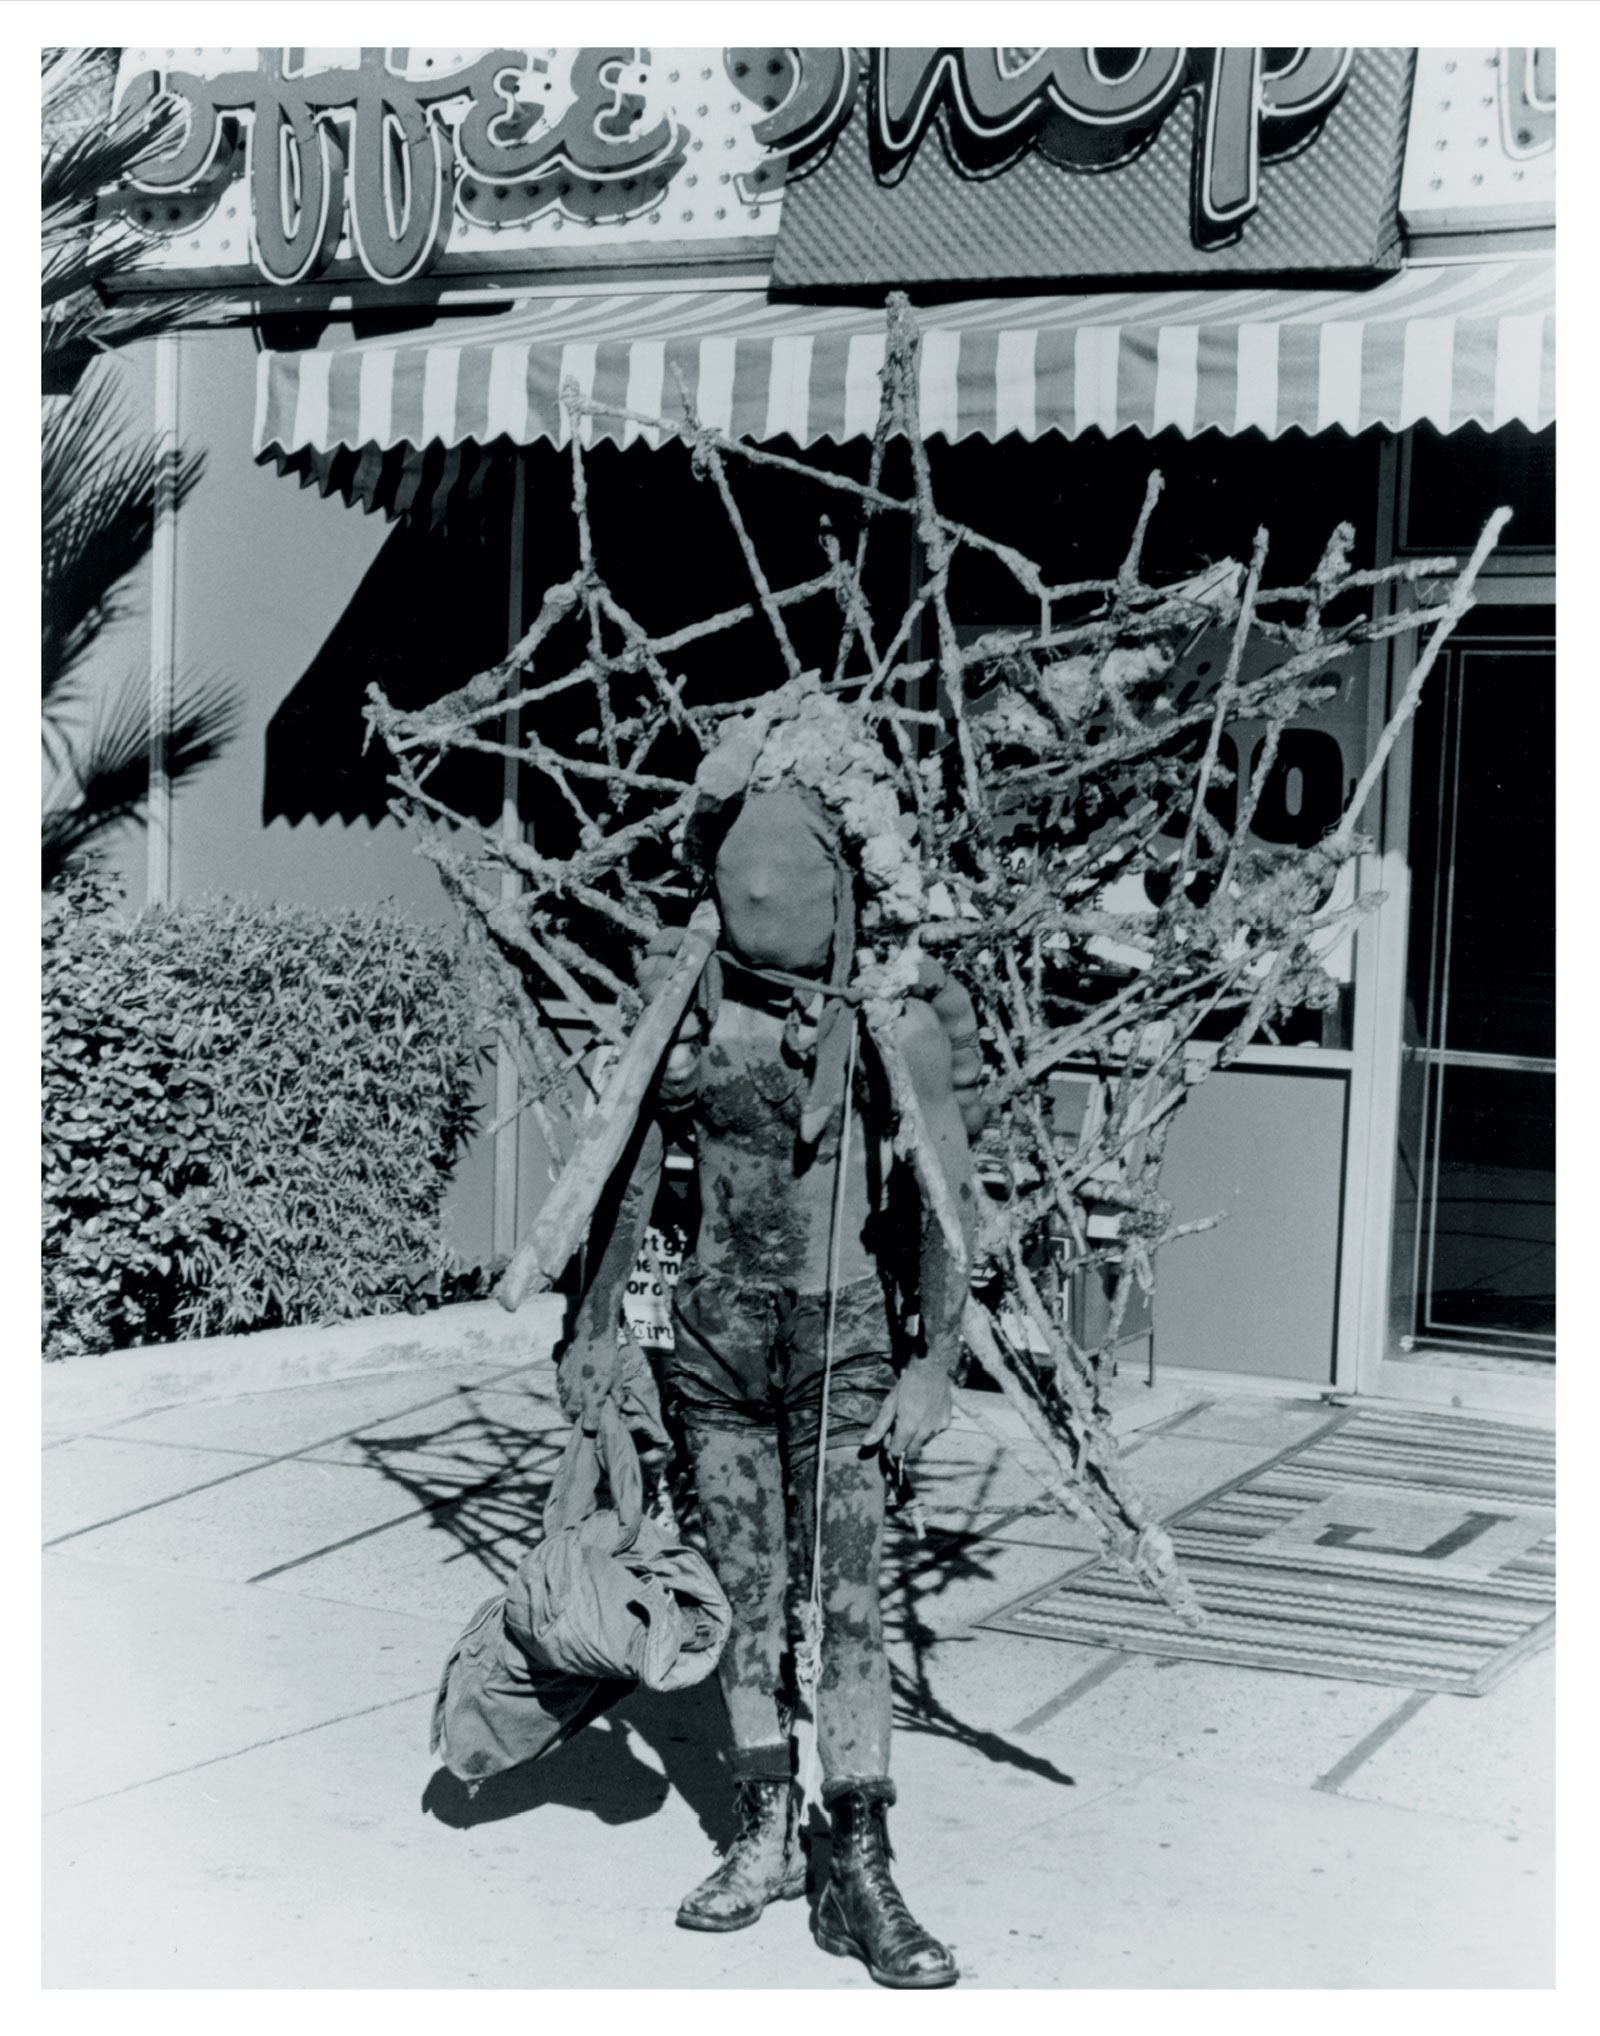 A postcard project by artist Kim Jones featuring a 1976 photograph of him as the Mudman performing his “Wilshire Boulevard Walk,” which went from Los Angeles to Santa Monica on 28 January 1976.